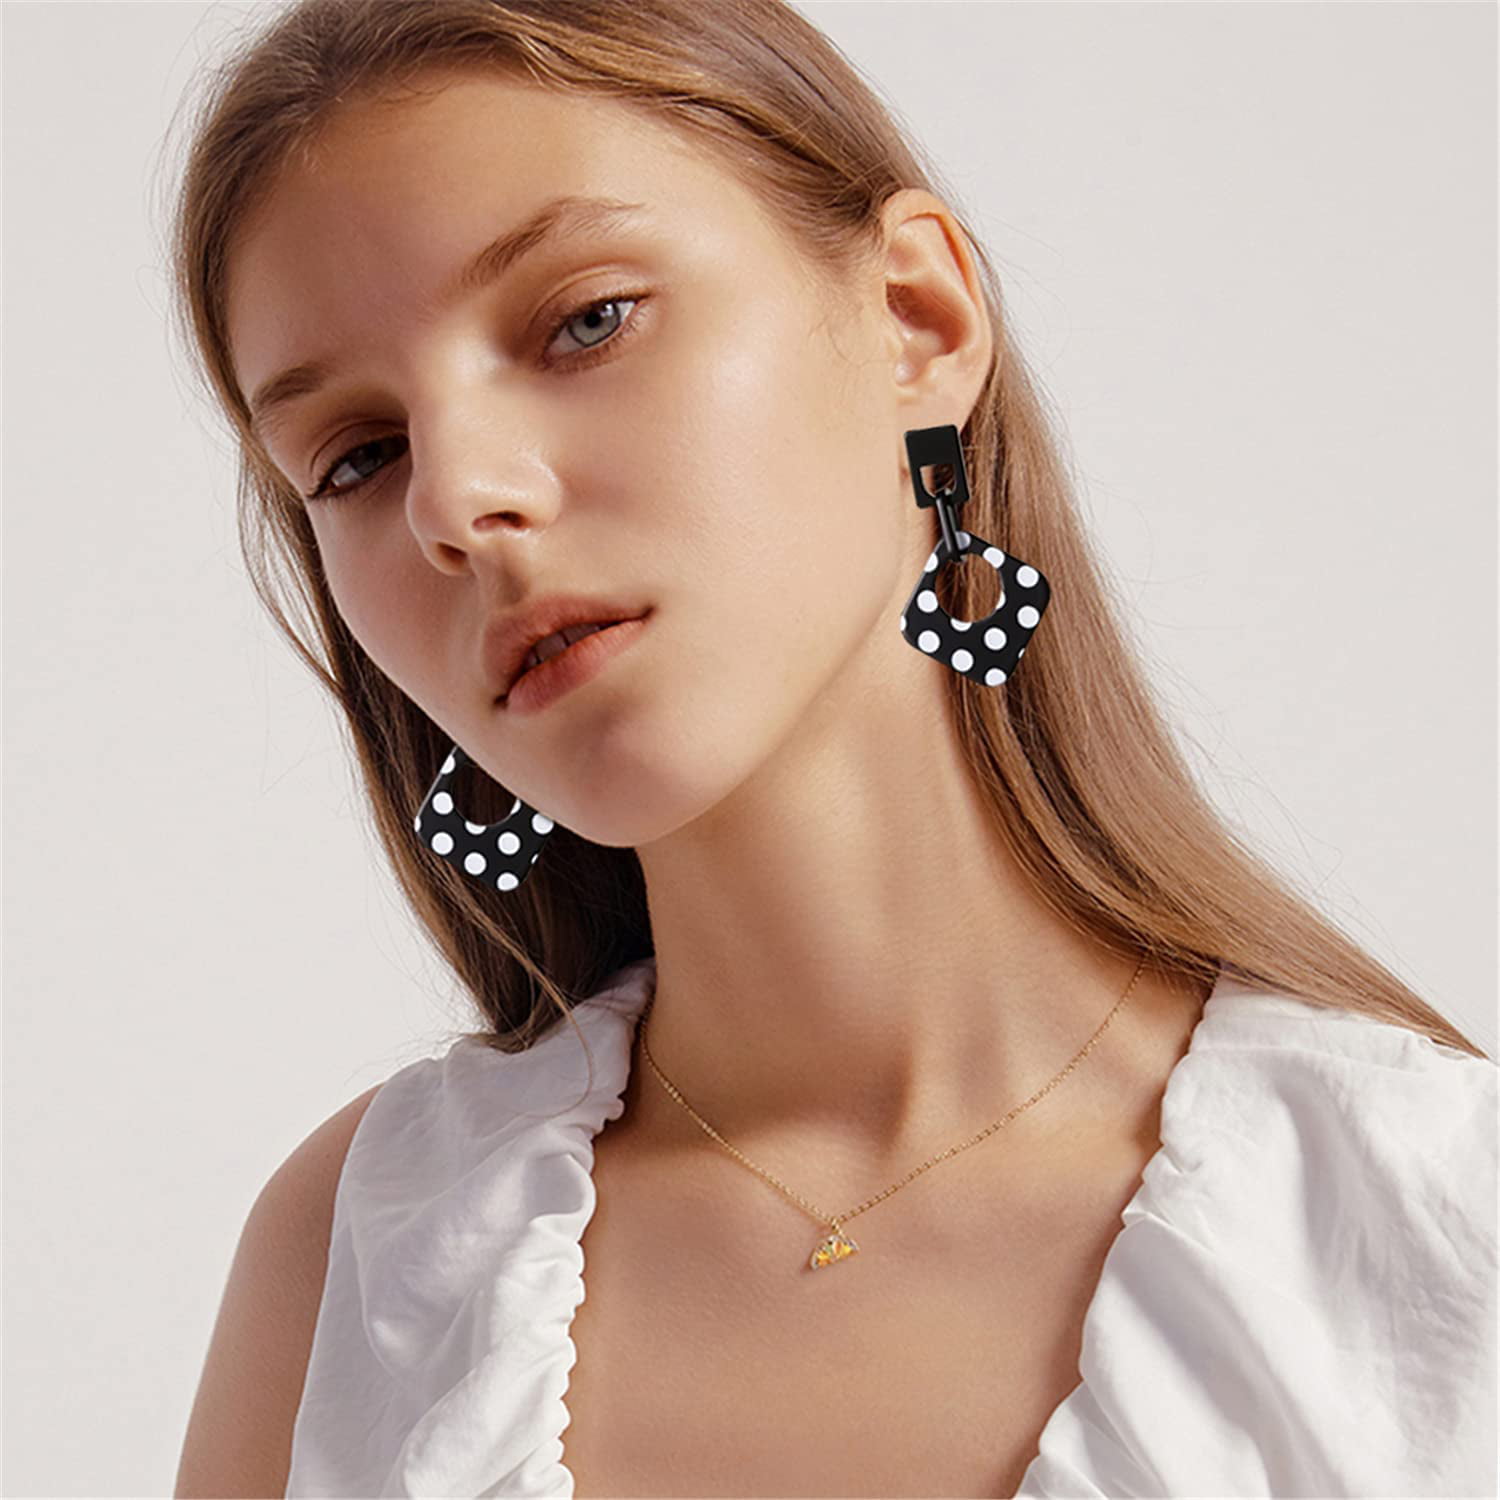 ANDPAI Unique 70s 80s 90s Bohemian Black White Resin Spots Striped Geometry Dangle Drop Stud Earrings Retro Cute Striped Square Checkered Circle Tag Pendant Earrings for Women Girls Statement Jewelry Gifts 